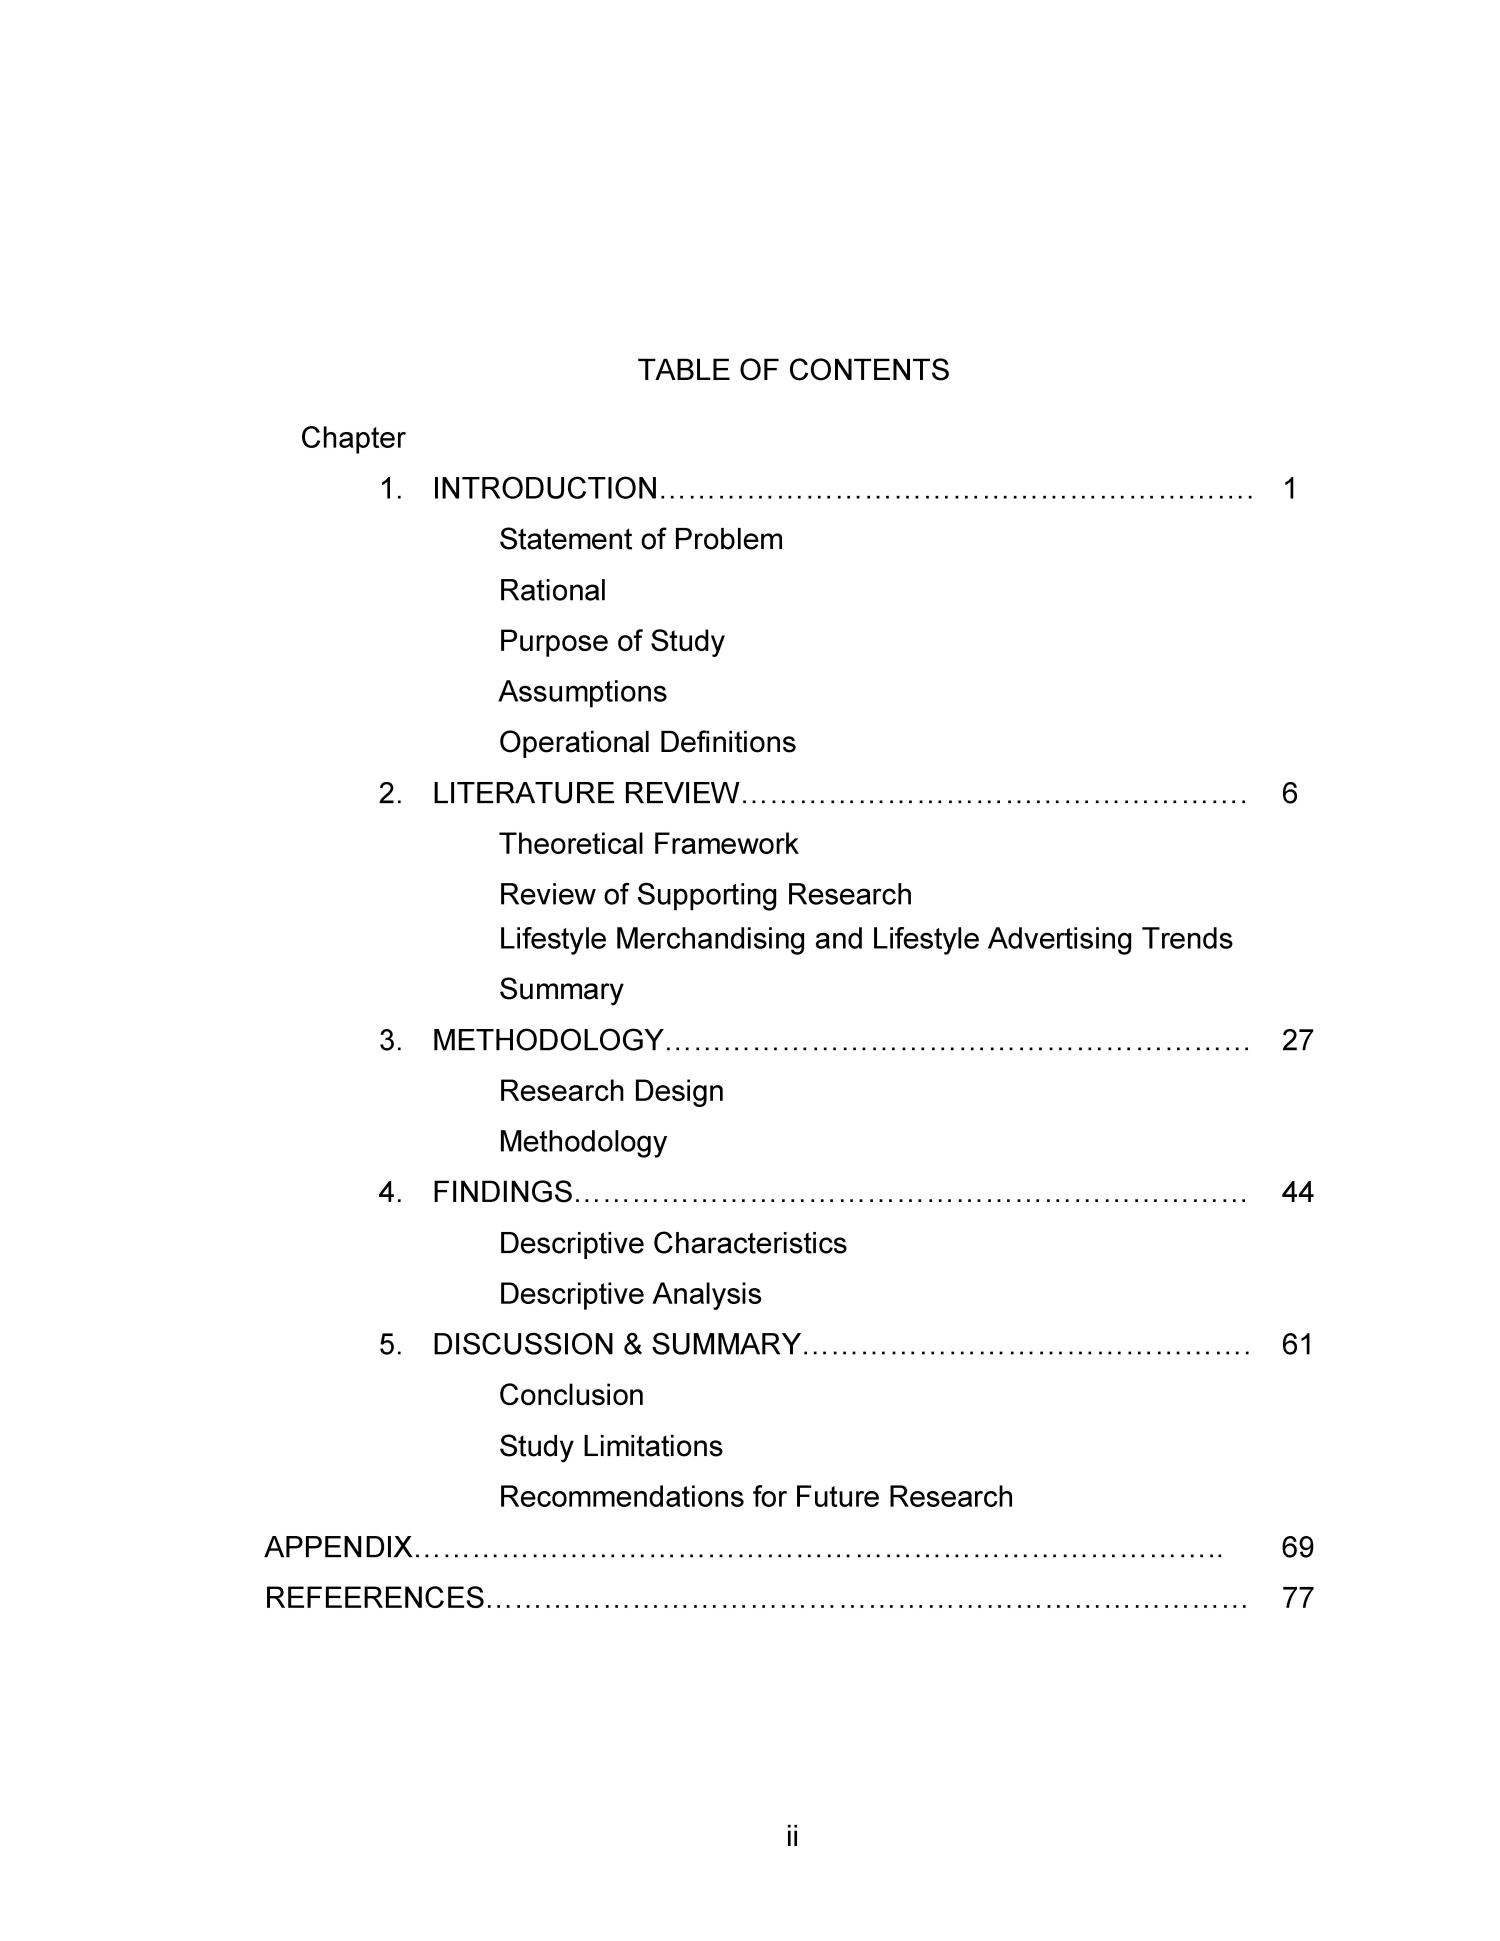 table of contents of literature review